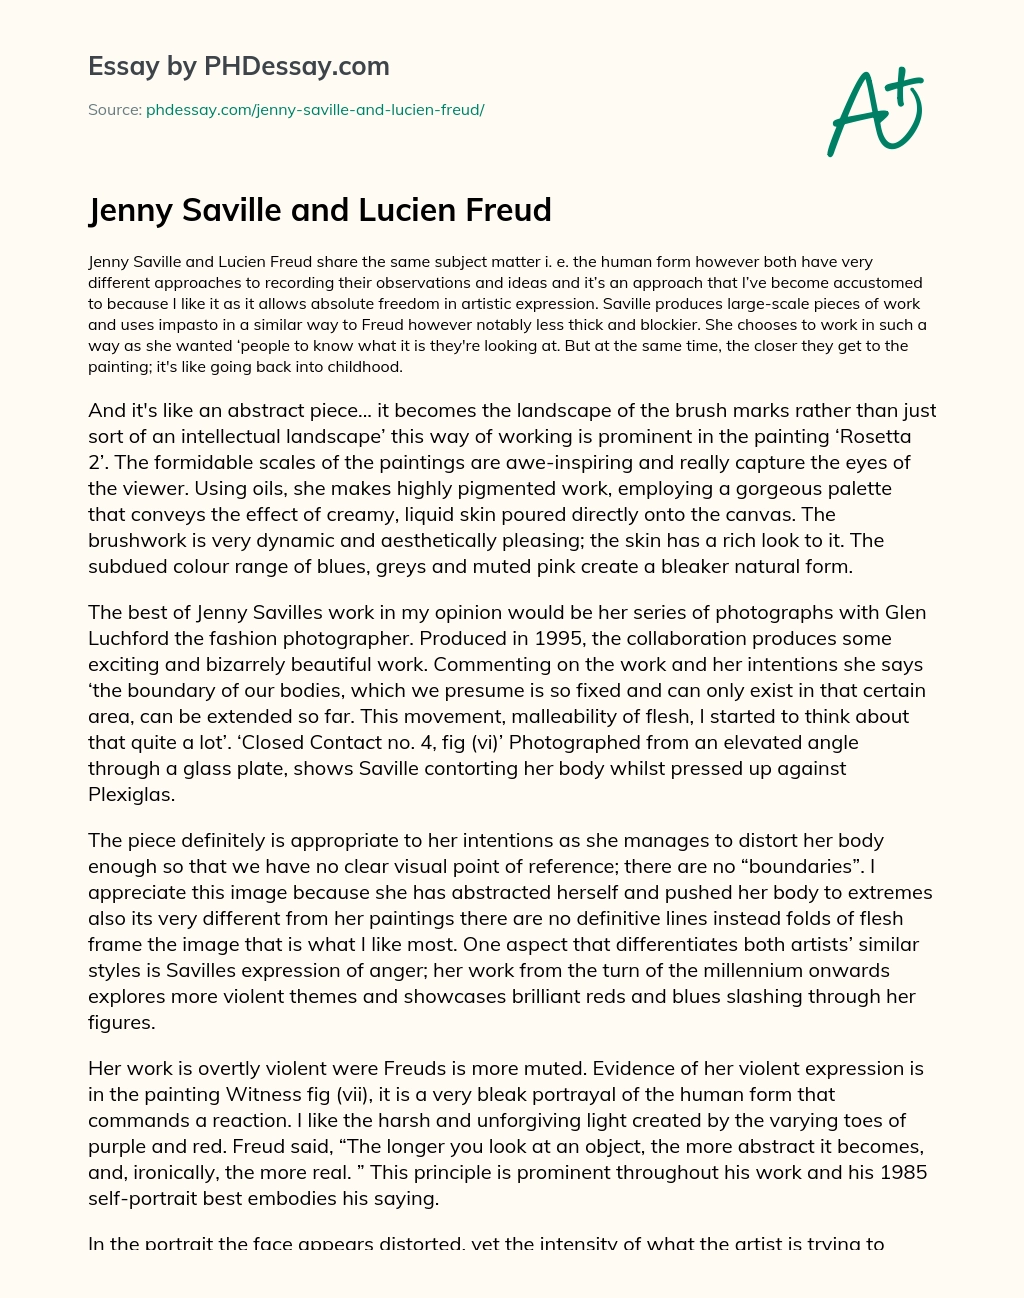 Jenny Saville and Lucien Freud essay